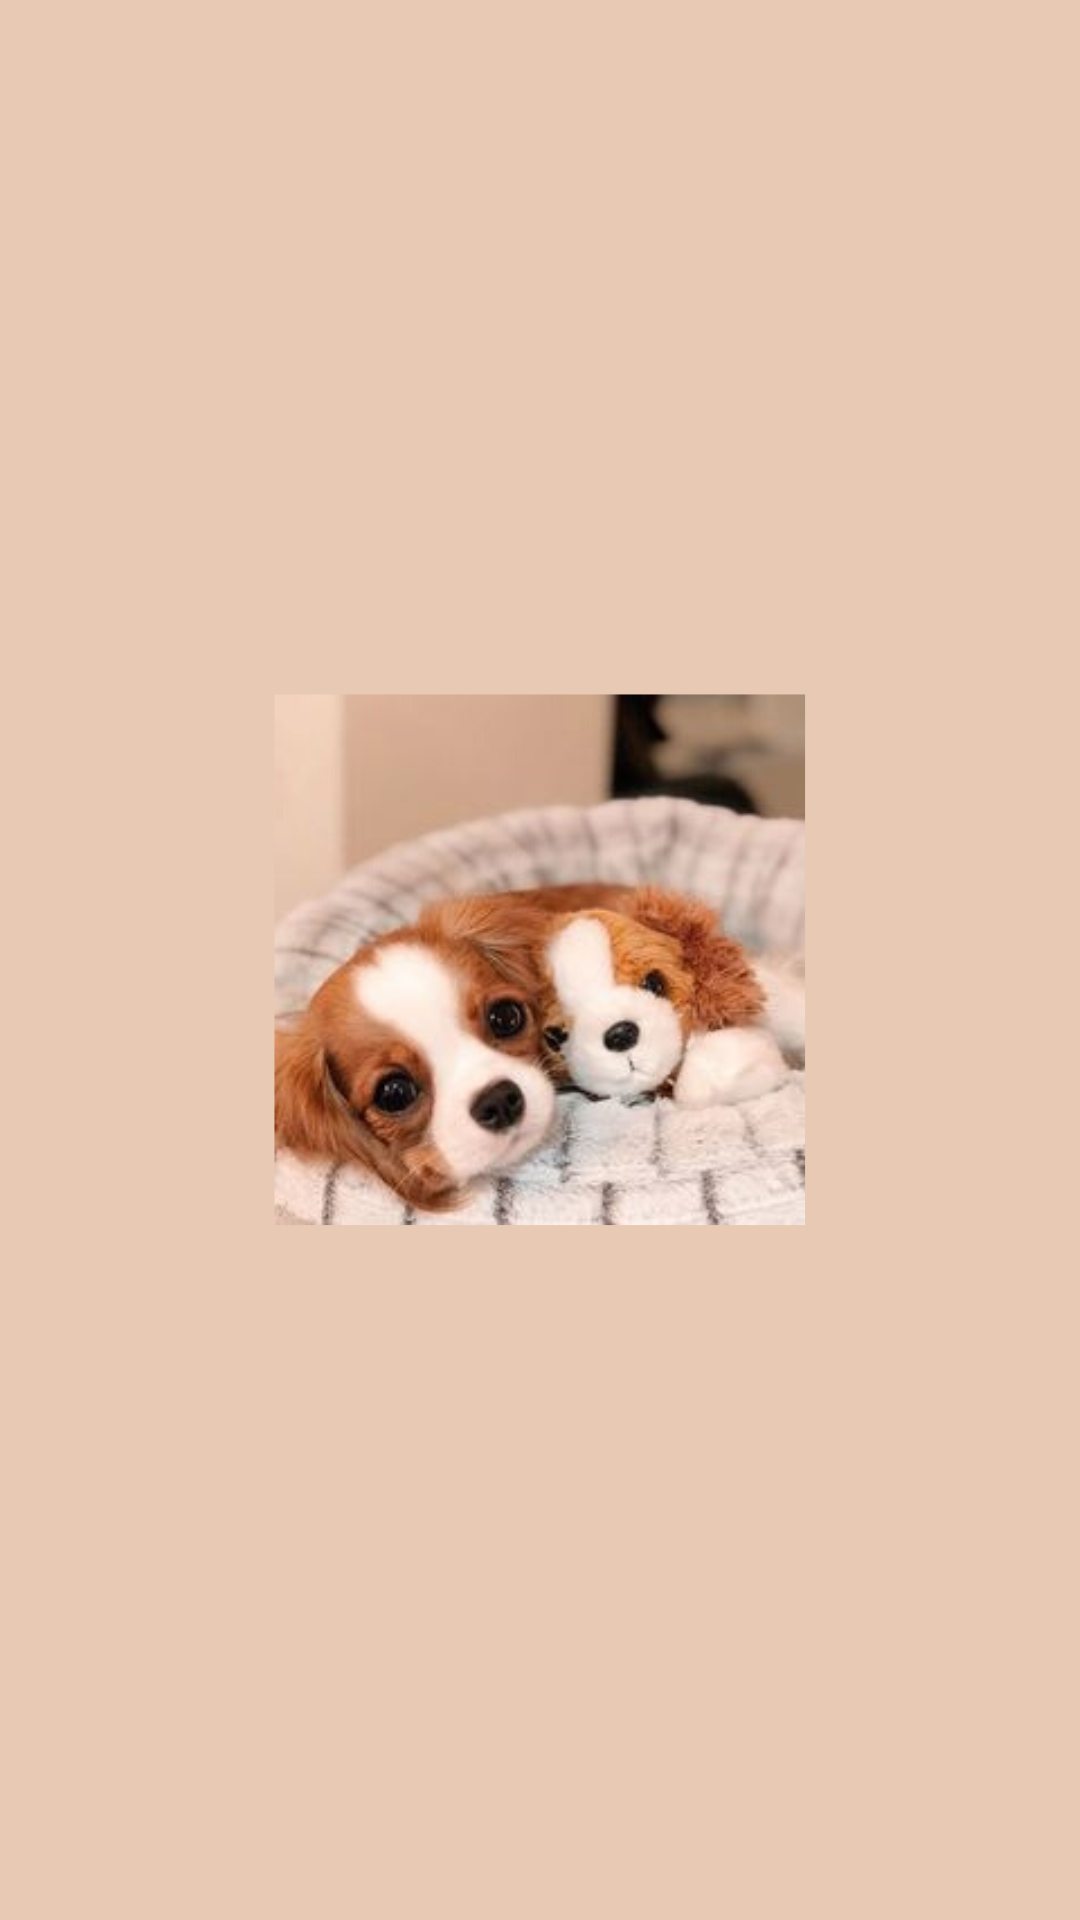  Hunde Hintergrundbild 1080x1920. I created this wallpaper but credits to the owner of the picture. Cute dog wallpaper, Dog tumblr, Kittens cutest